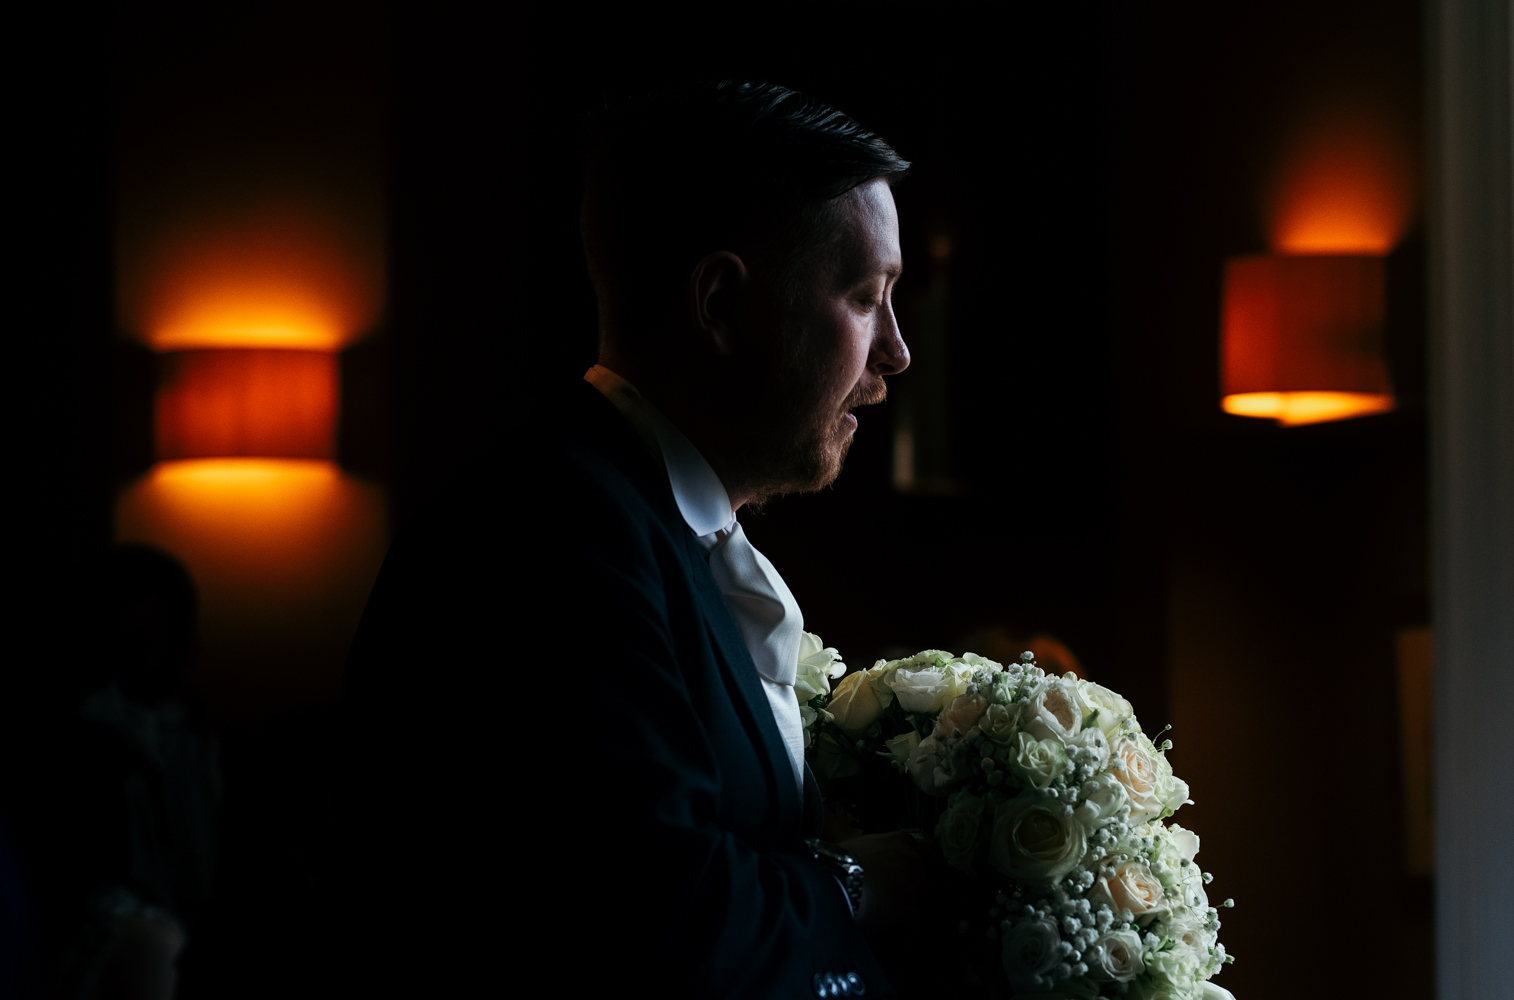 A dark and moody photo of the groom inside the wedding venue holding the flowers